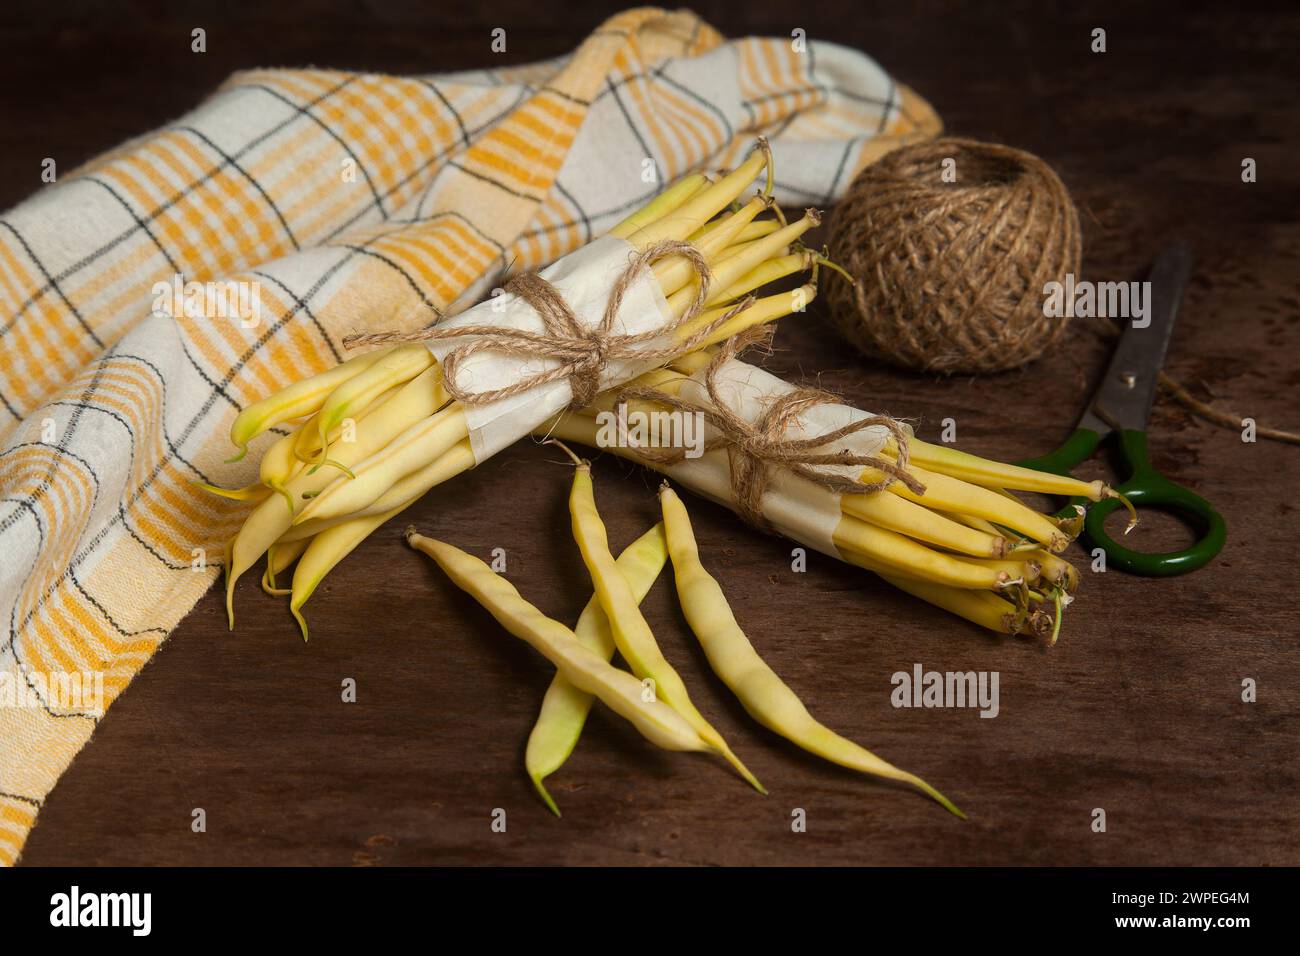 Two bunch and several pods of raw yellow pods of haricot with yellow kitchen towel, scissors and ball of thread on wooden background. French beans or Stock Photo